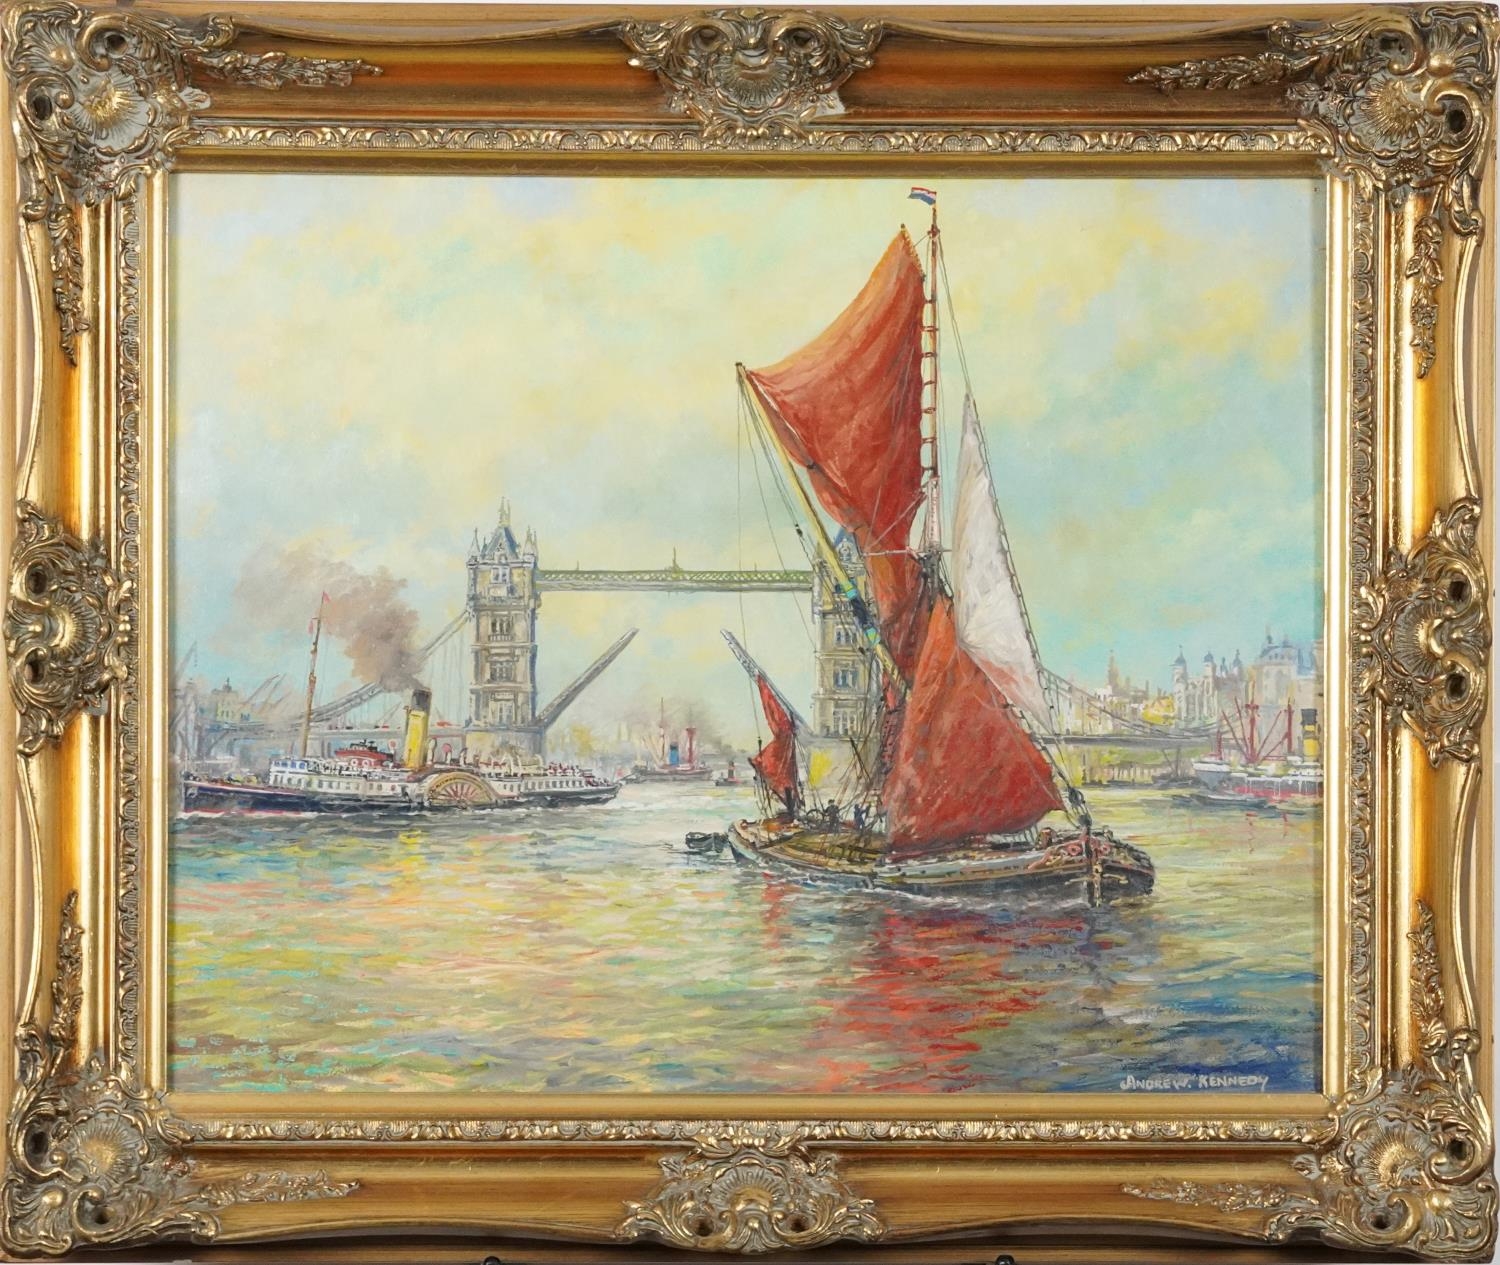 Andrew Kennedy - The River Thames with London Bridge and paddle steamer, contemporary oil on canvas, - Image 2 of 4